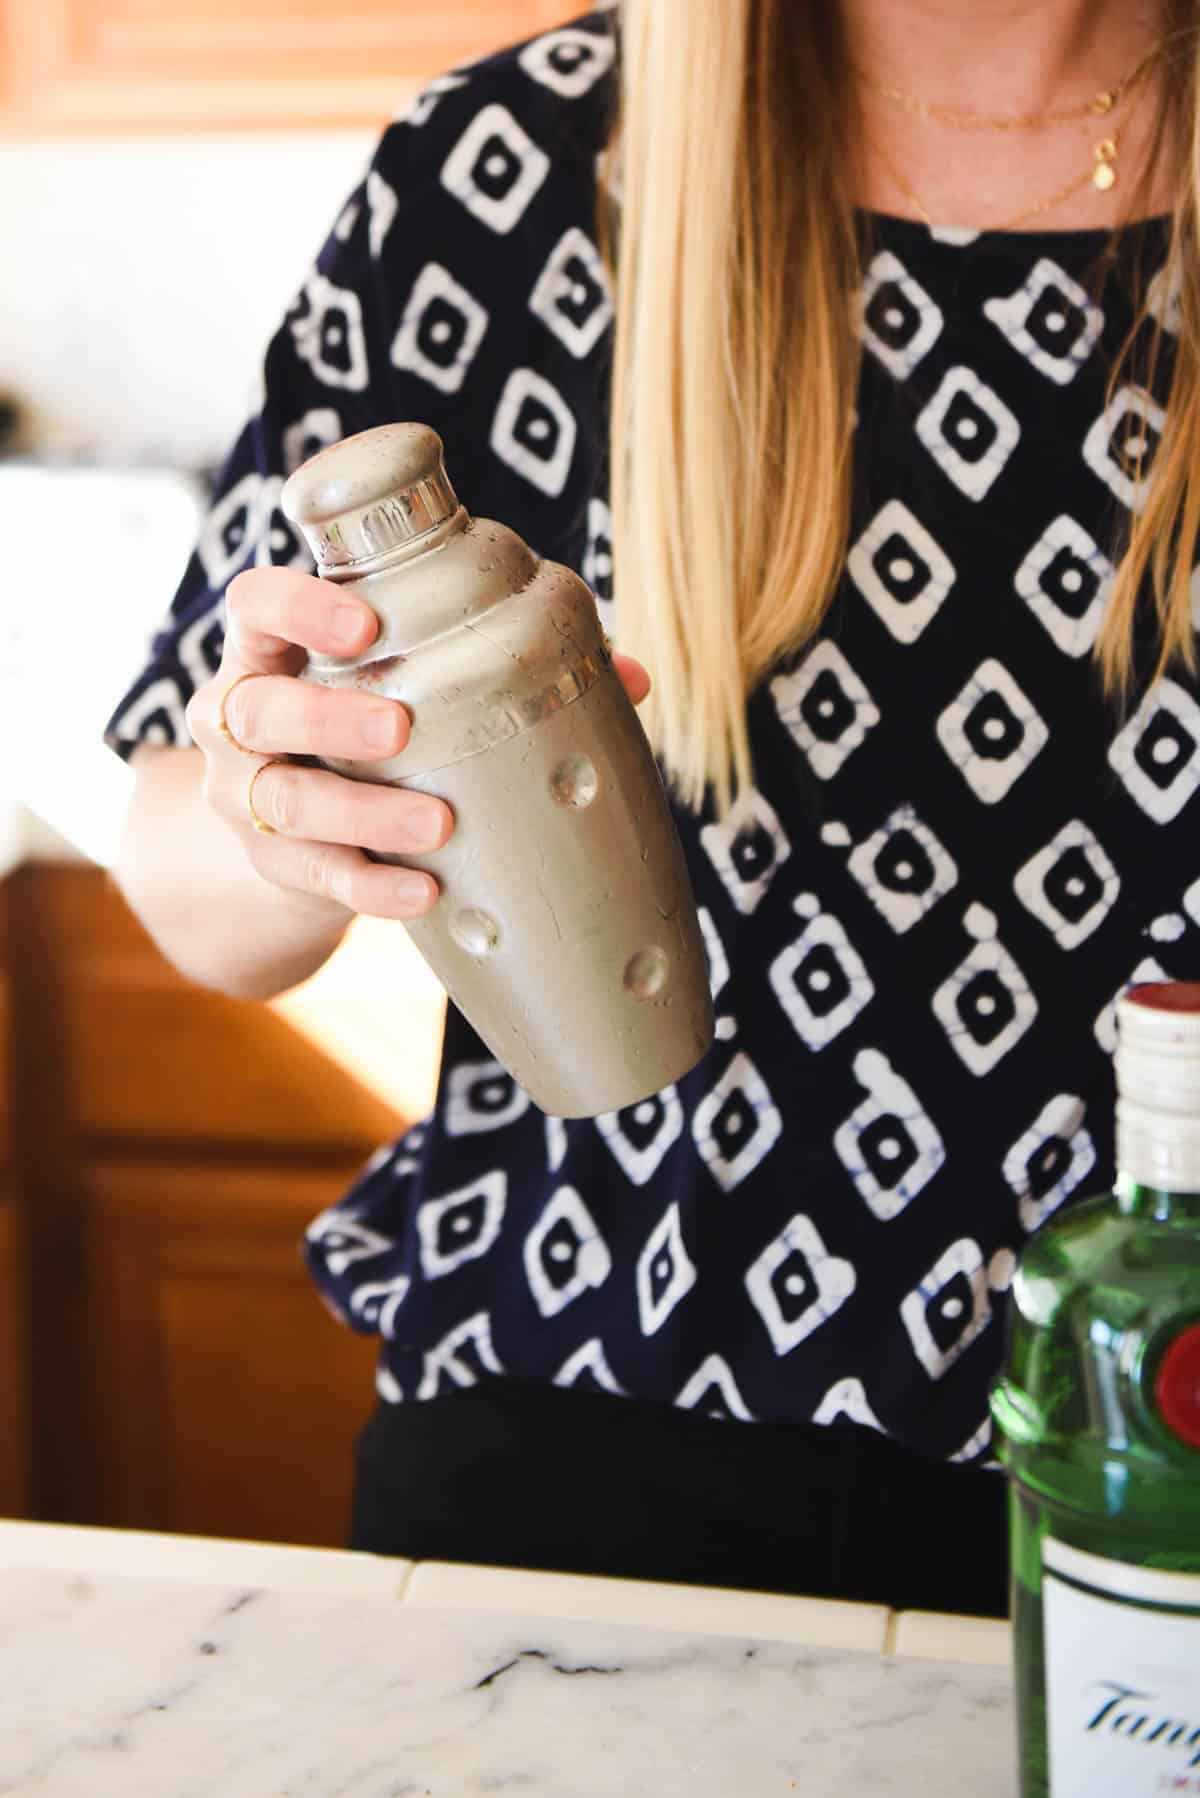 Woman in a black and white top shaking a silver cocktail shaker.